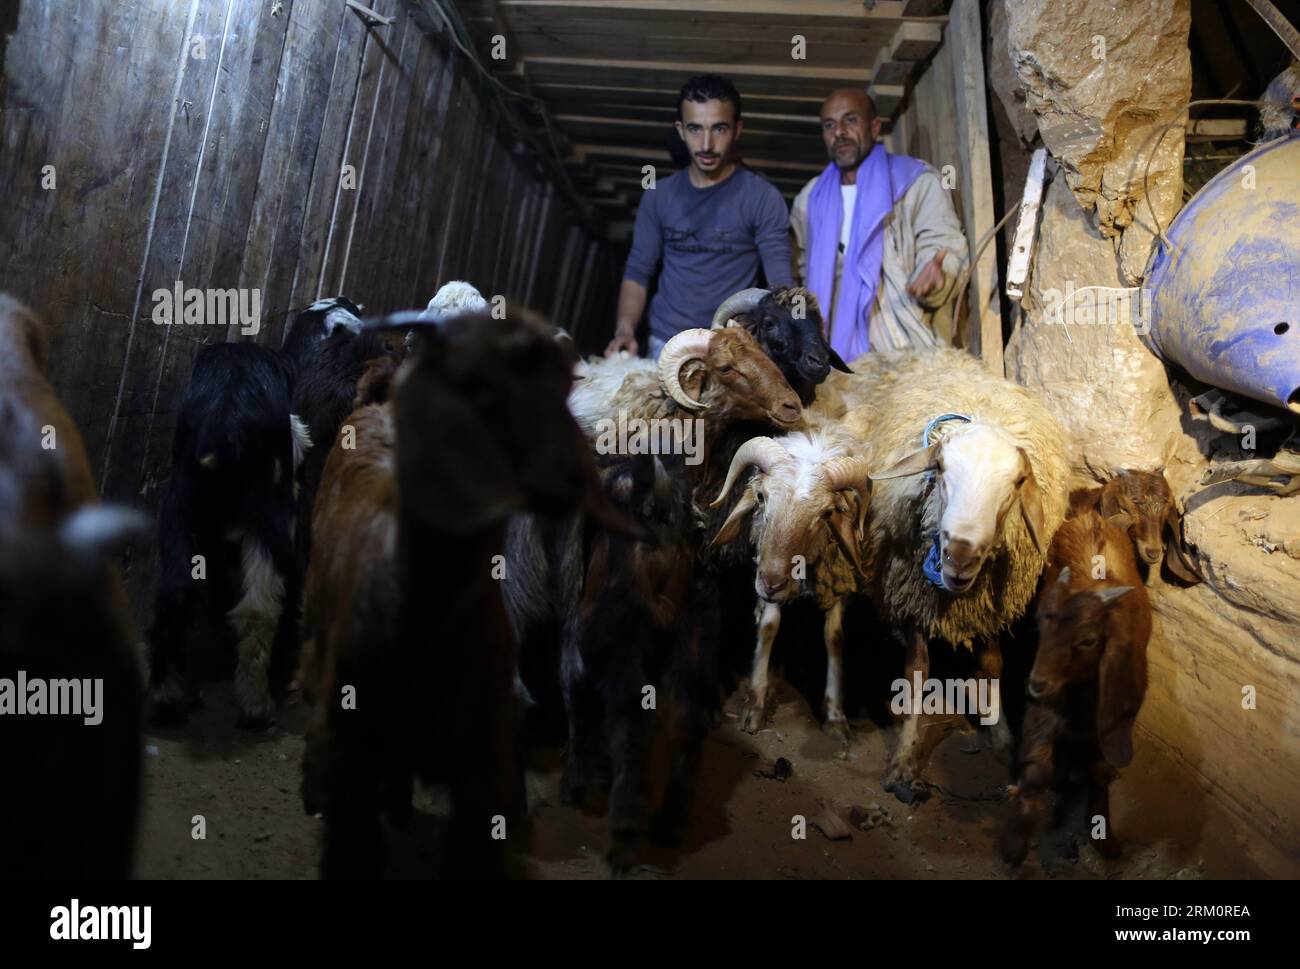 Bildnummer: 59466525  Datum: 02.04.2013  Copyright: imago/Xinhua (130402) -- GAZA, April 2, 2013 (Xinhua) -- Palestinian drive sheep through a smuggling tunnel between the Hamas-ruled Gaza Strip and Egypt in the southern Gaza Strip city of Rafah on April 2, 2013. The Egyptian army started to knock down Gaza smuggling tunnels last month after a high Egyptian court has urged the authorities in Cairo to tear down all the tunnels along the borders between Gaza and Egypt. (Xinhua/Wissam Nassar) (djj) MIDEAST-GAZA-SMUGGLING-TUNNELS PUBLICATIONxNOTxINxCHN Gesellschaft Gaza Gazastreifen Palästina Schm Stock Photo